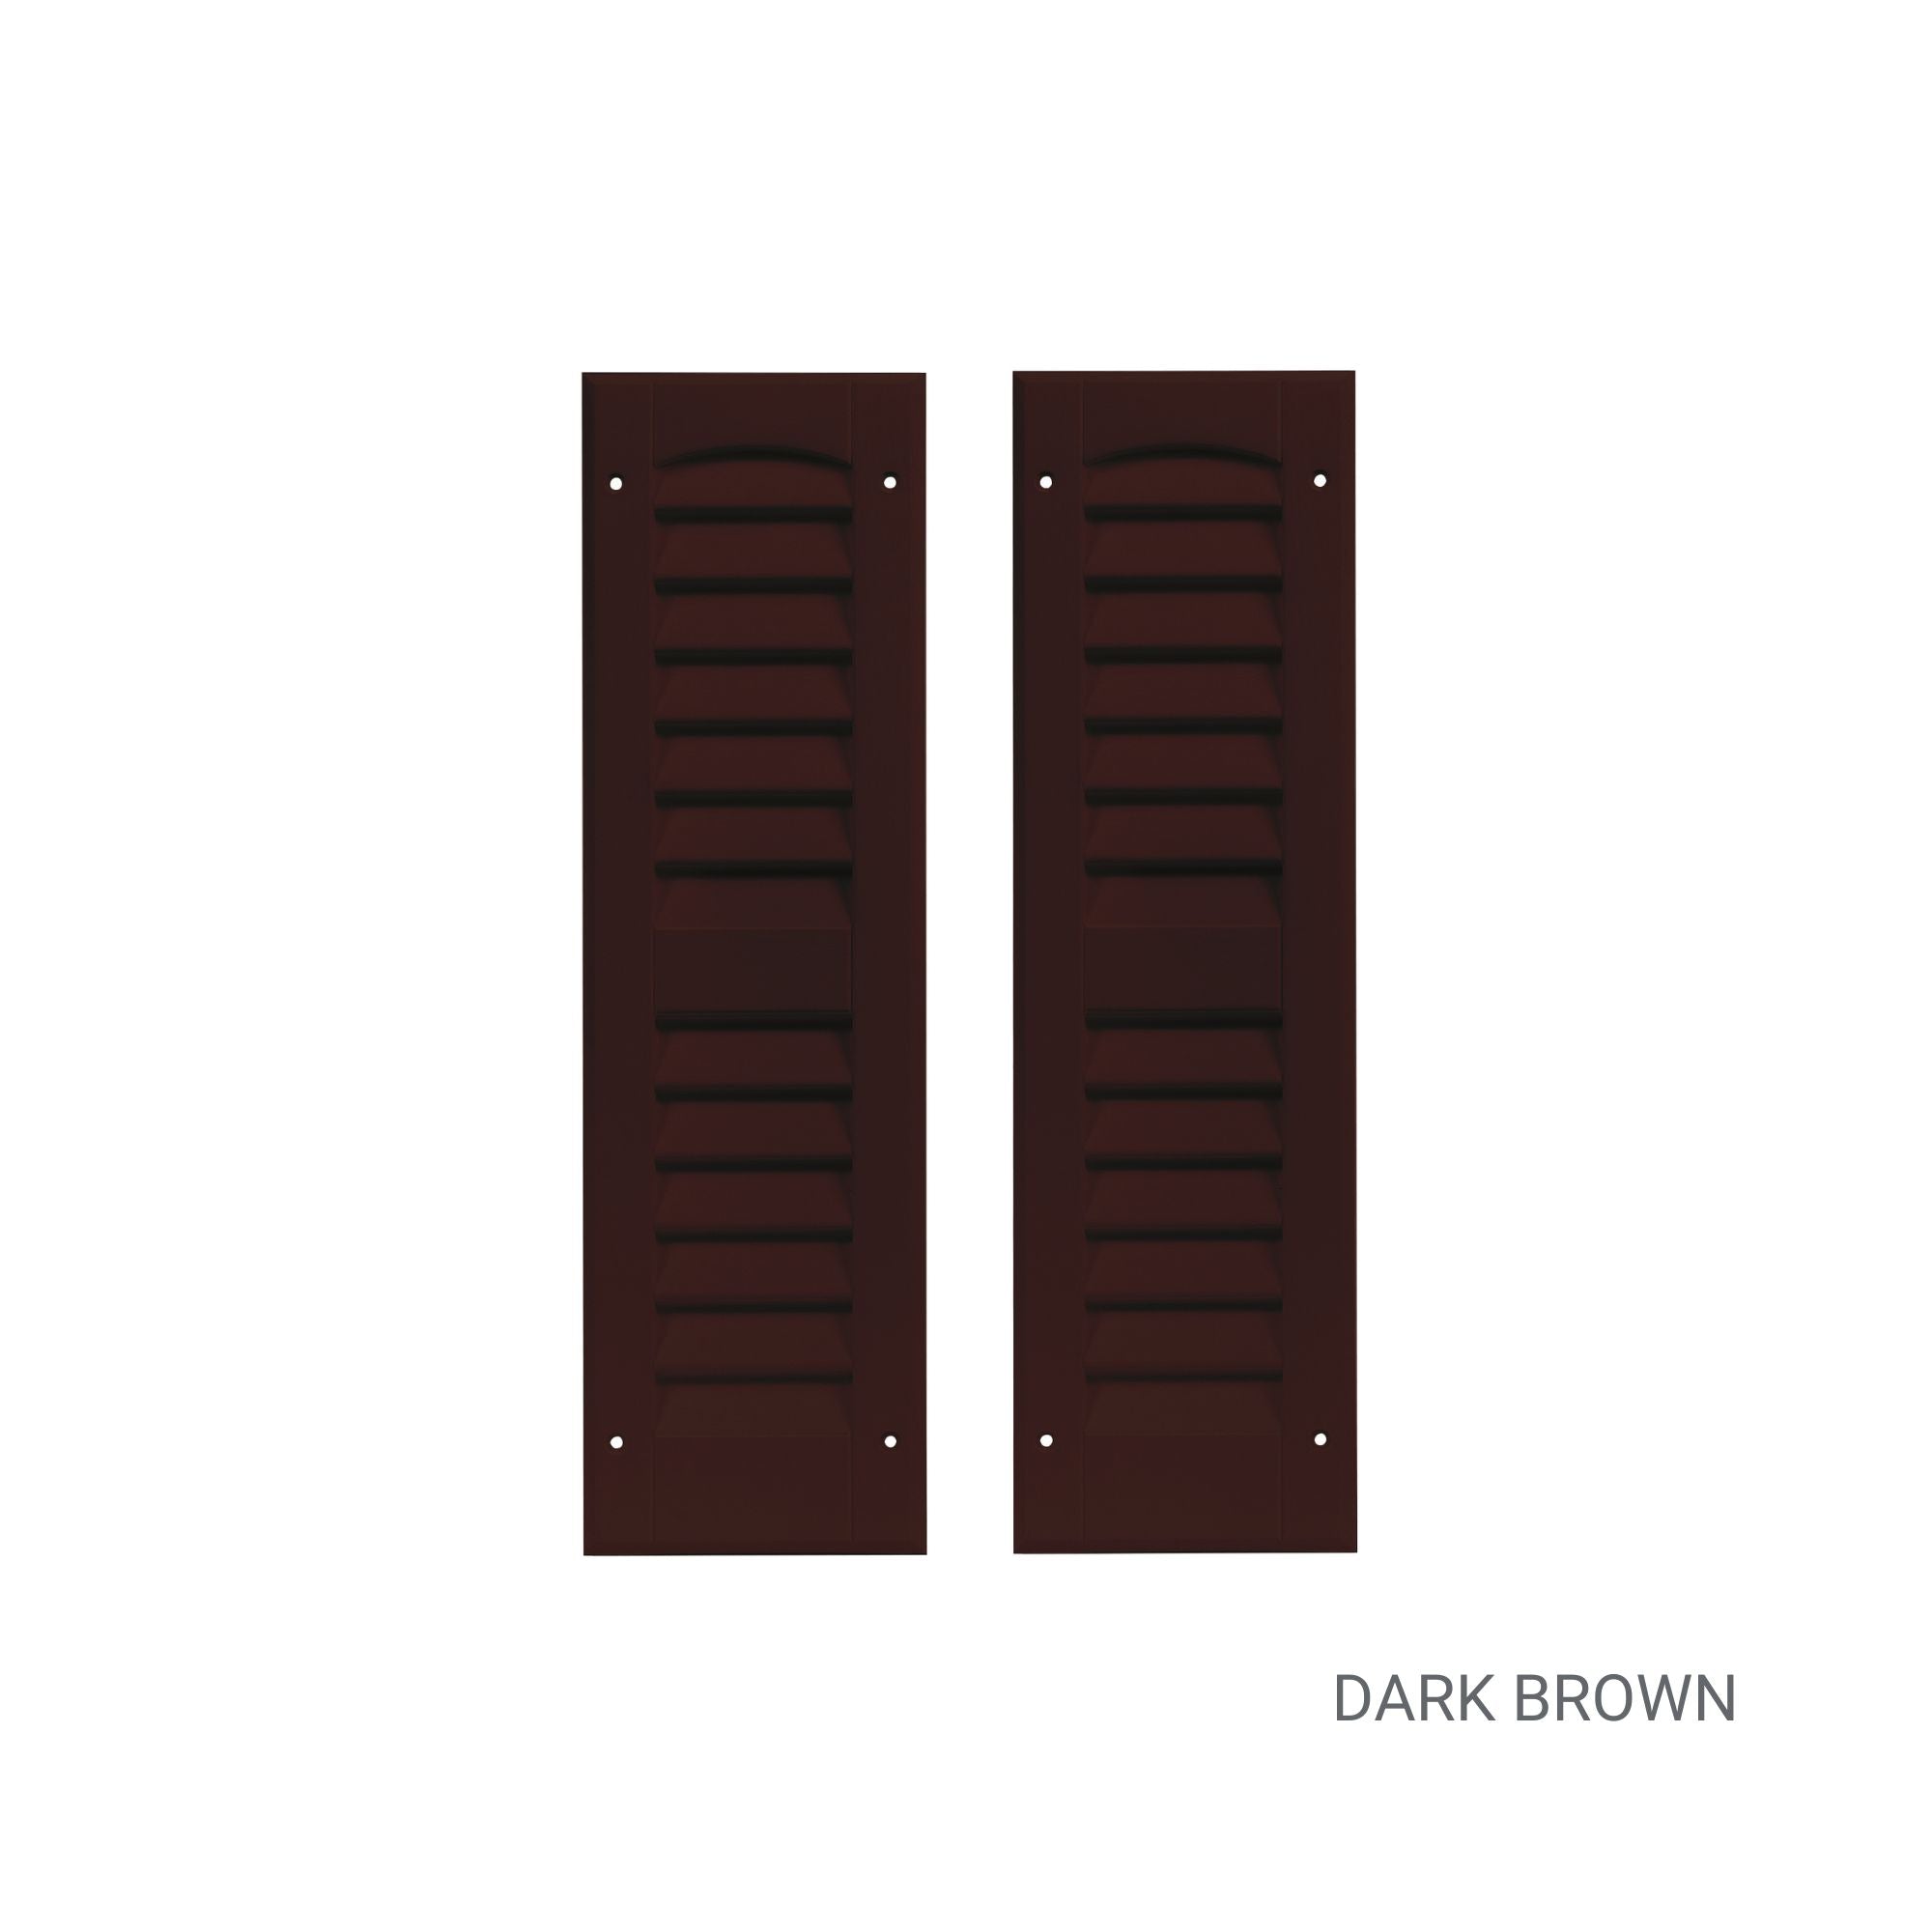 Pair of 6" W x 21" H Louvered Dark Brown Shutters for Sheds, Playhouses, and MORE